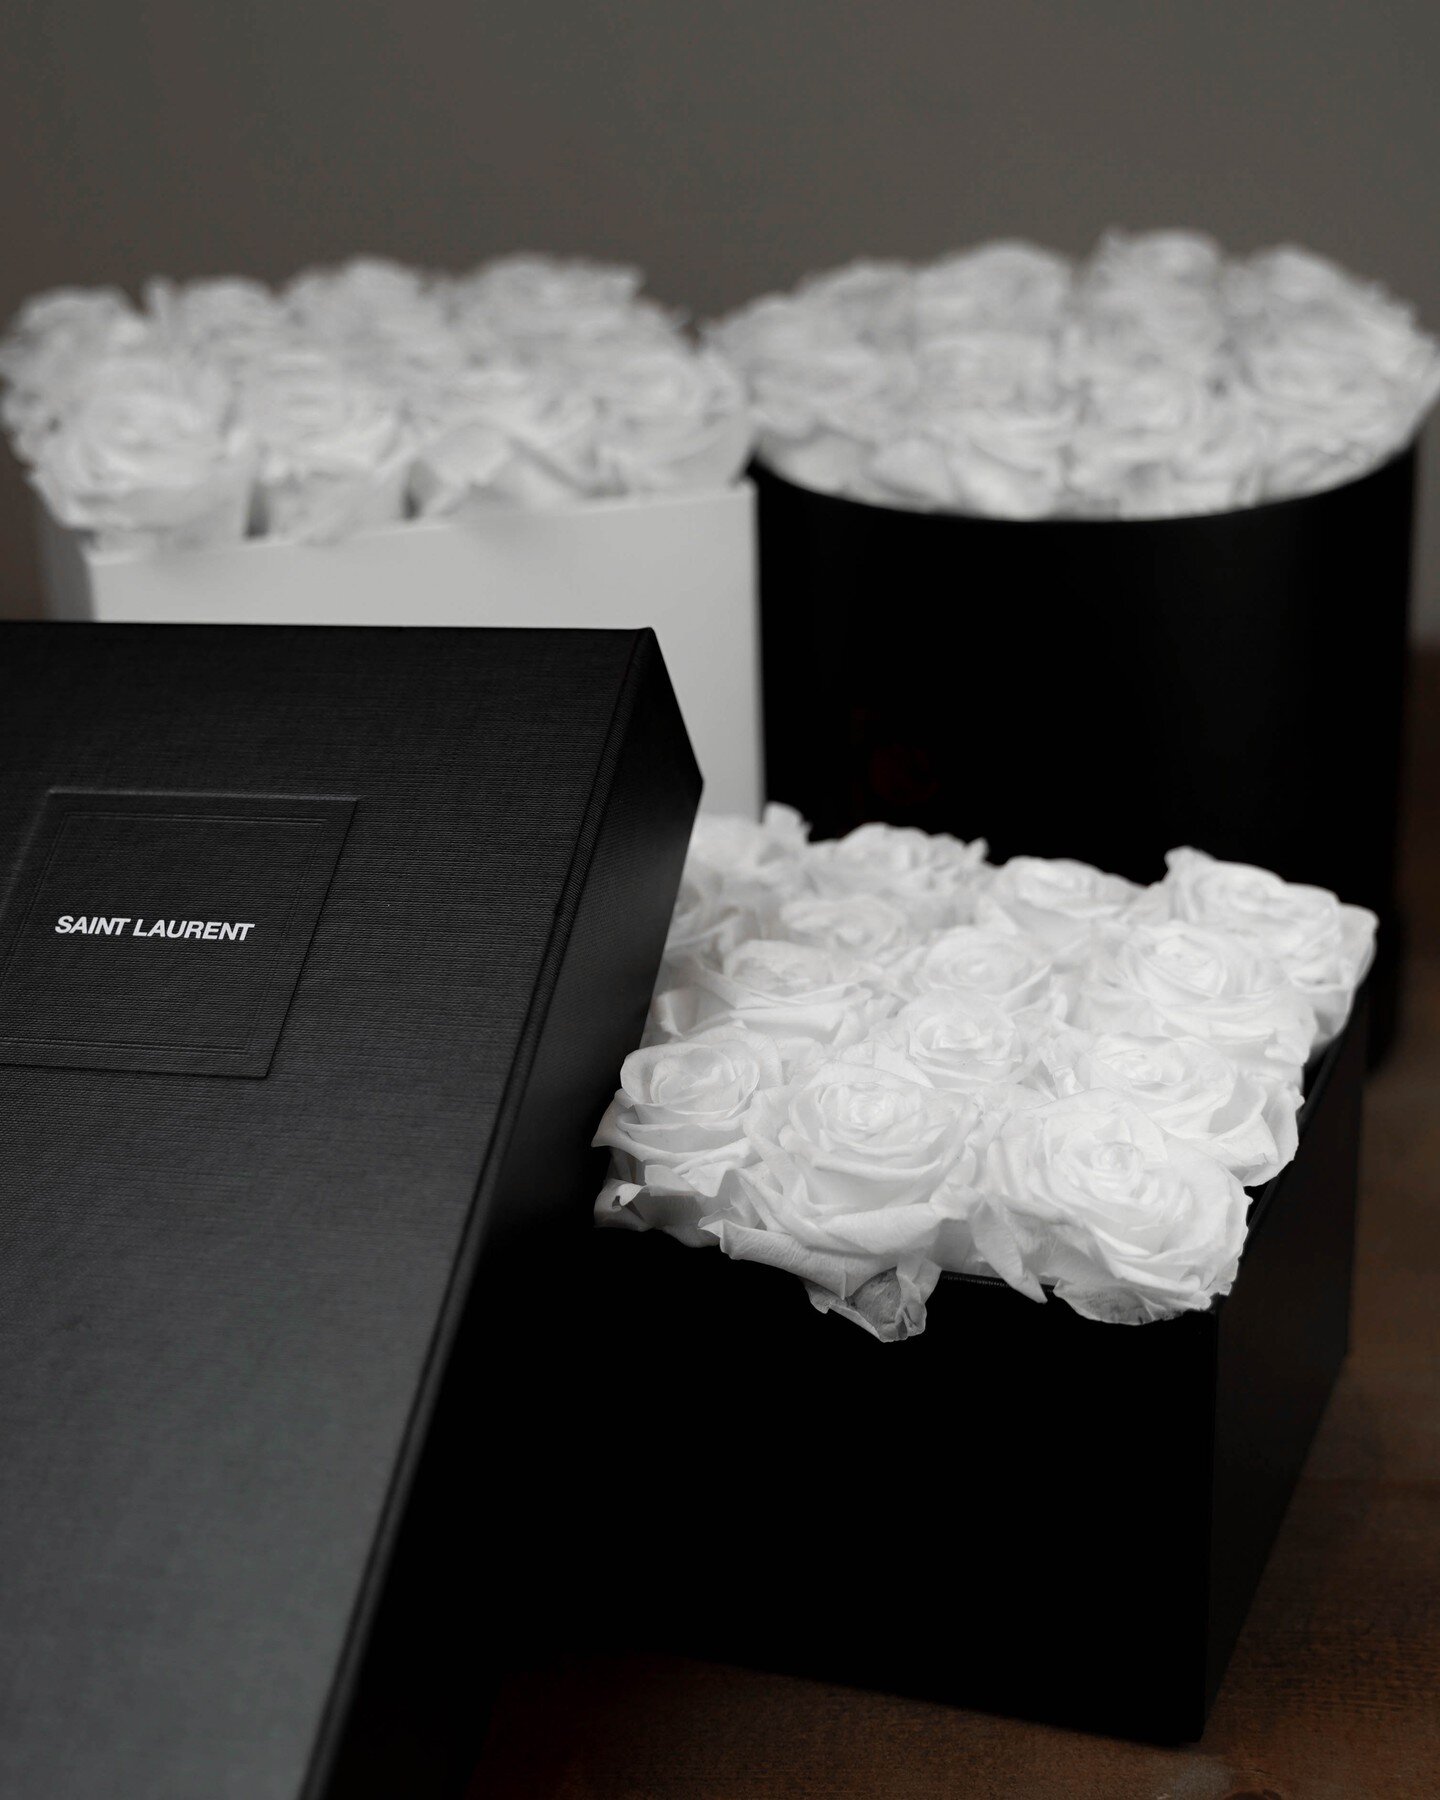 Arranged for Will T. 12.05.21
&mdash;
Featured is a customer&rsquo;s YSL shoe box sent in for a white perpetual roses arrangement, repurposed for a gift.
&mdash;
Box Dimensions: 12&rdquo; W x 6.75&rdquo; L x 4.25&rdquo; H
Total Roses: 28

#madamrose 